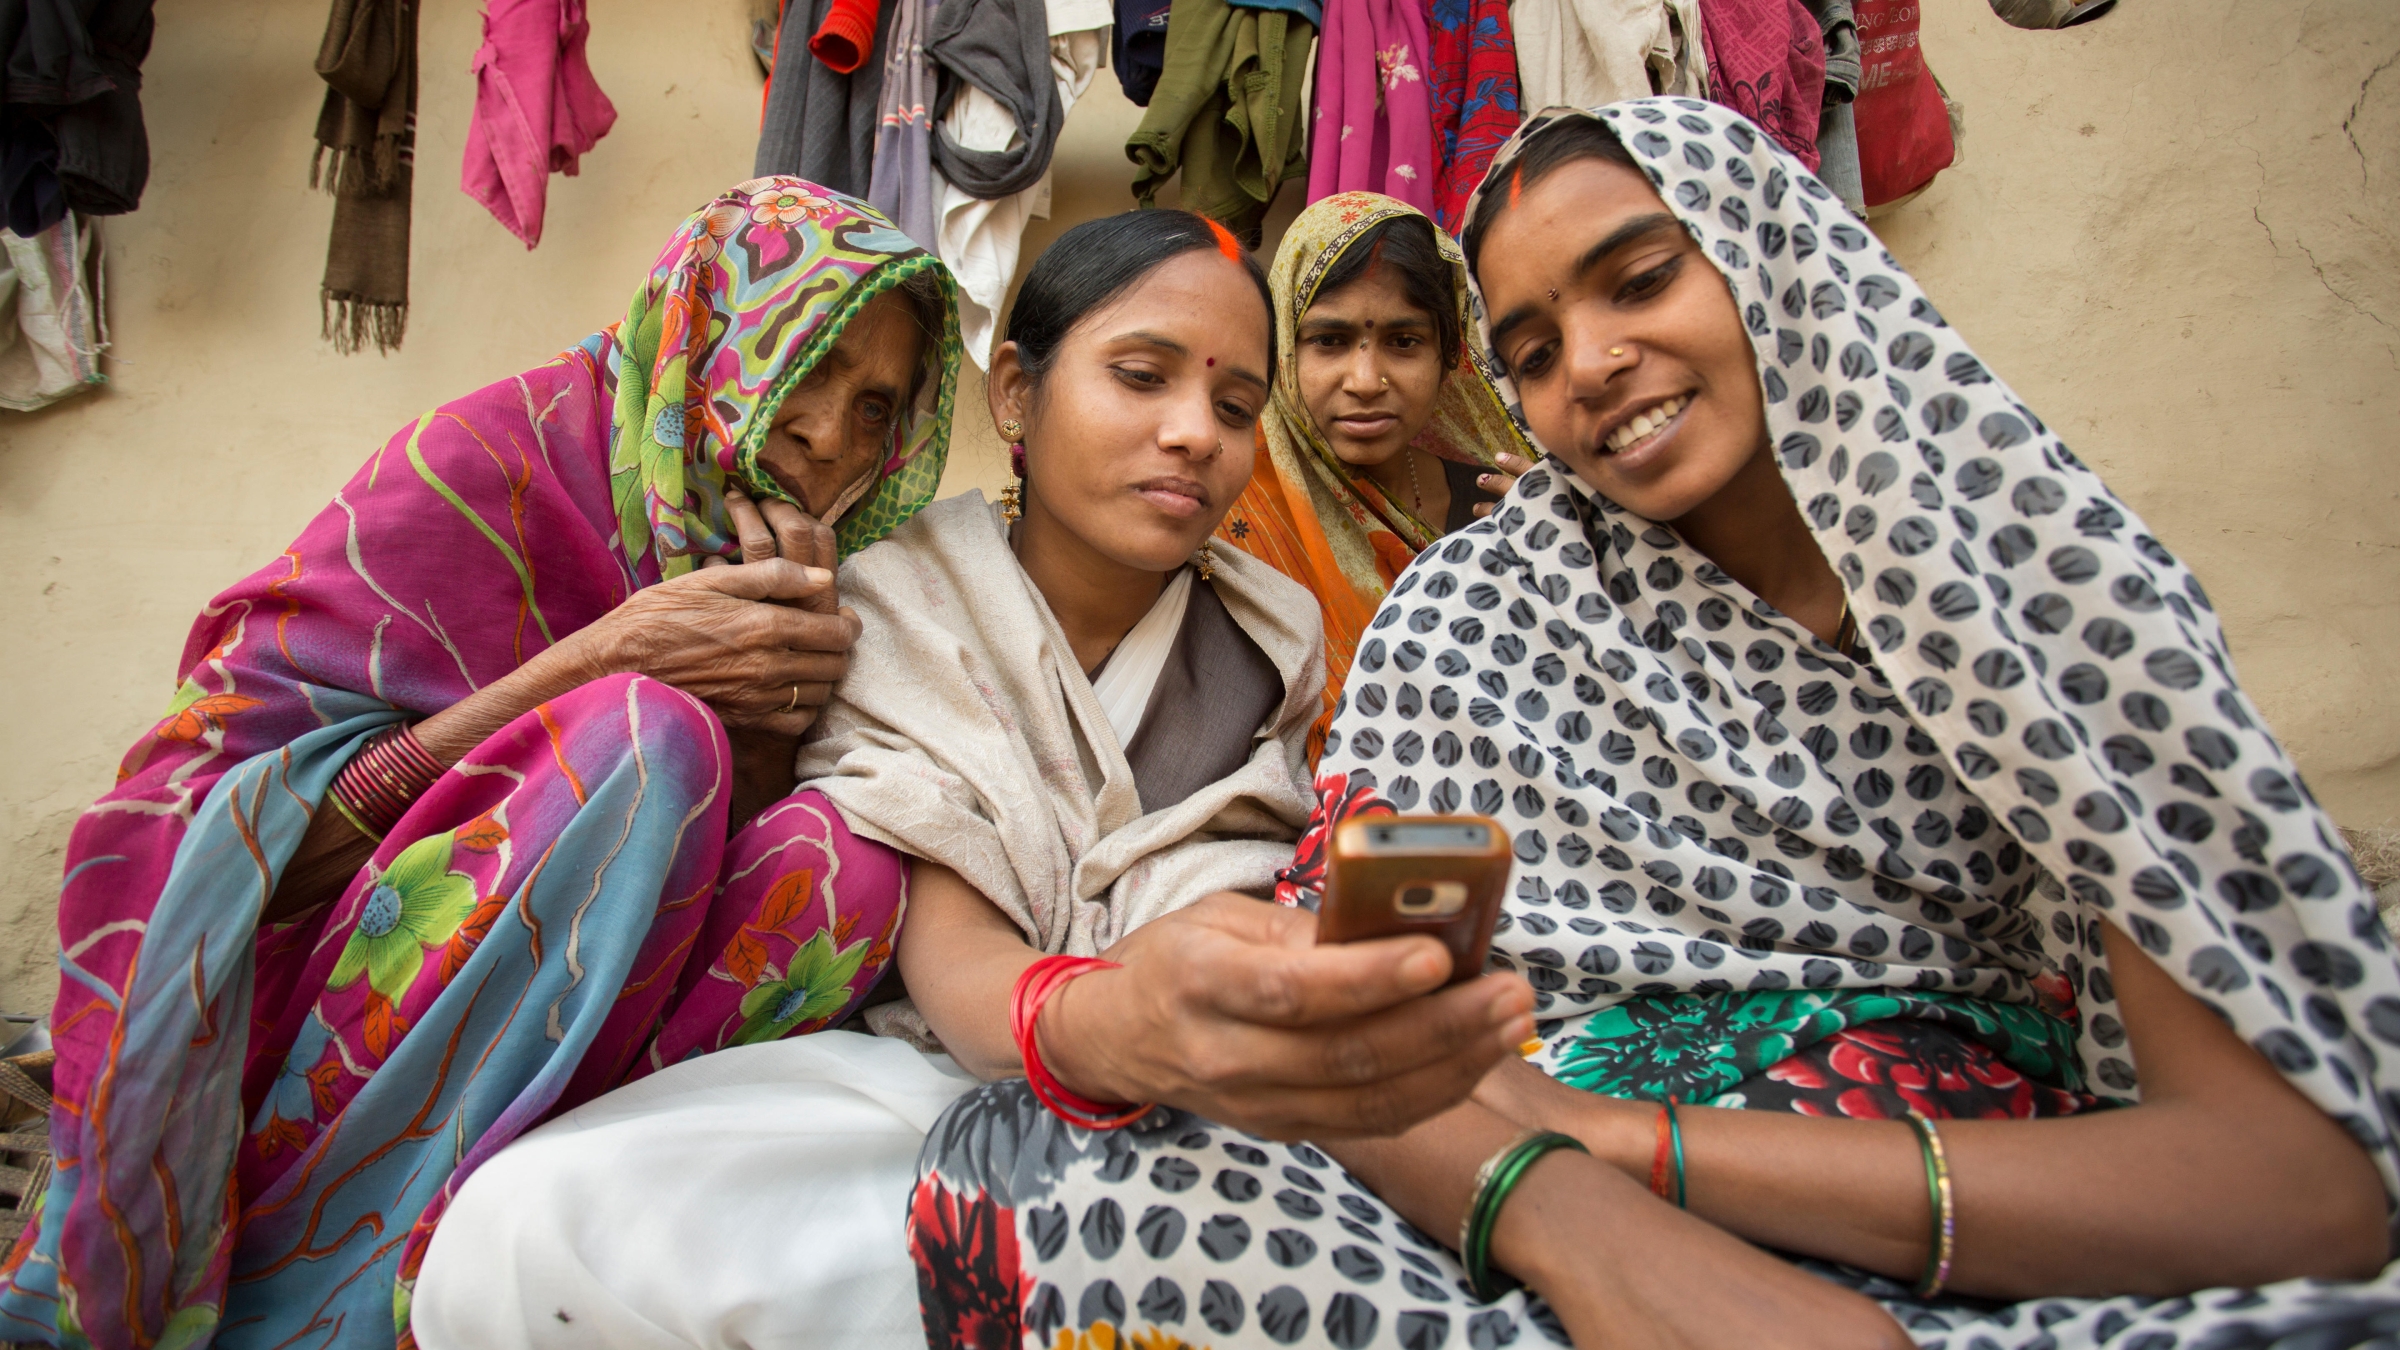 Smartphone use has exploded in India